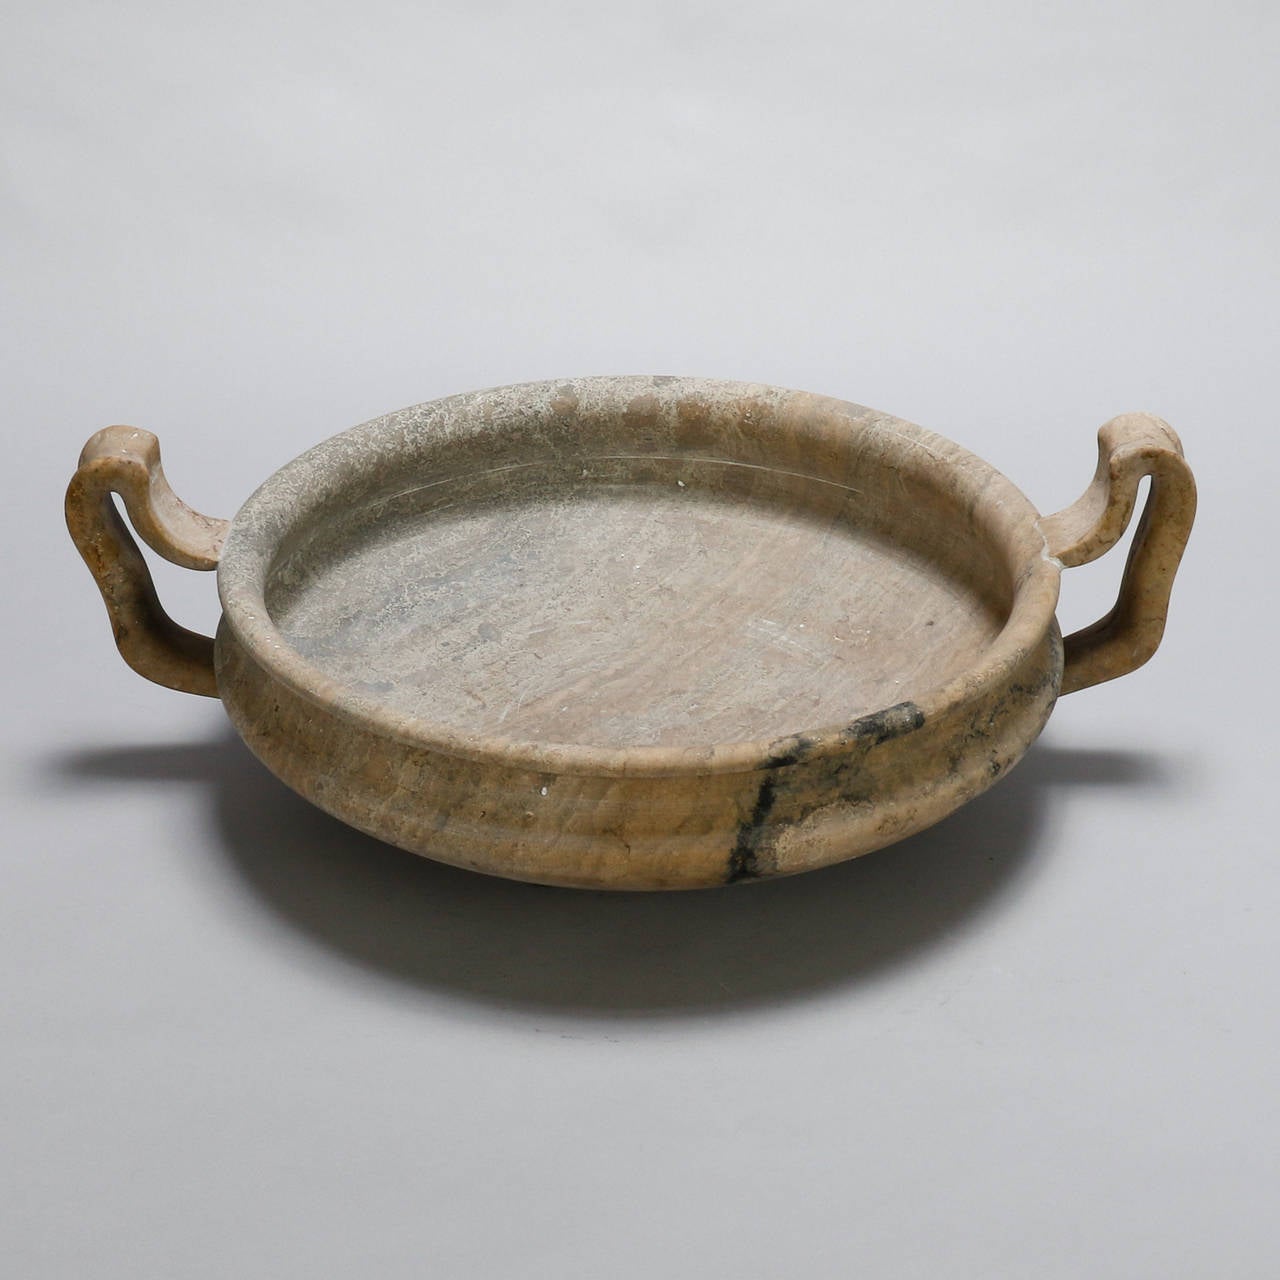 Italian centerpiece dates from the 1930s and features a large, shallow bowl with open work handles hand-carved from a piece of creamy alabaster with some gray veining.

Dimensions:
6” H x 26” W x 9” D.

Retail: $3,495.00.